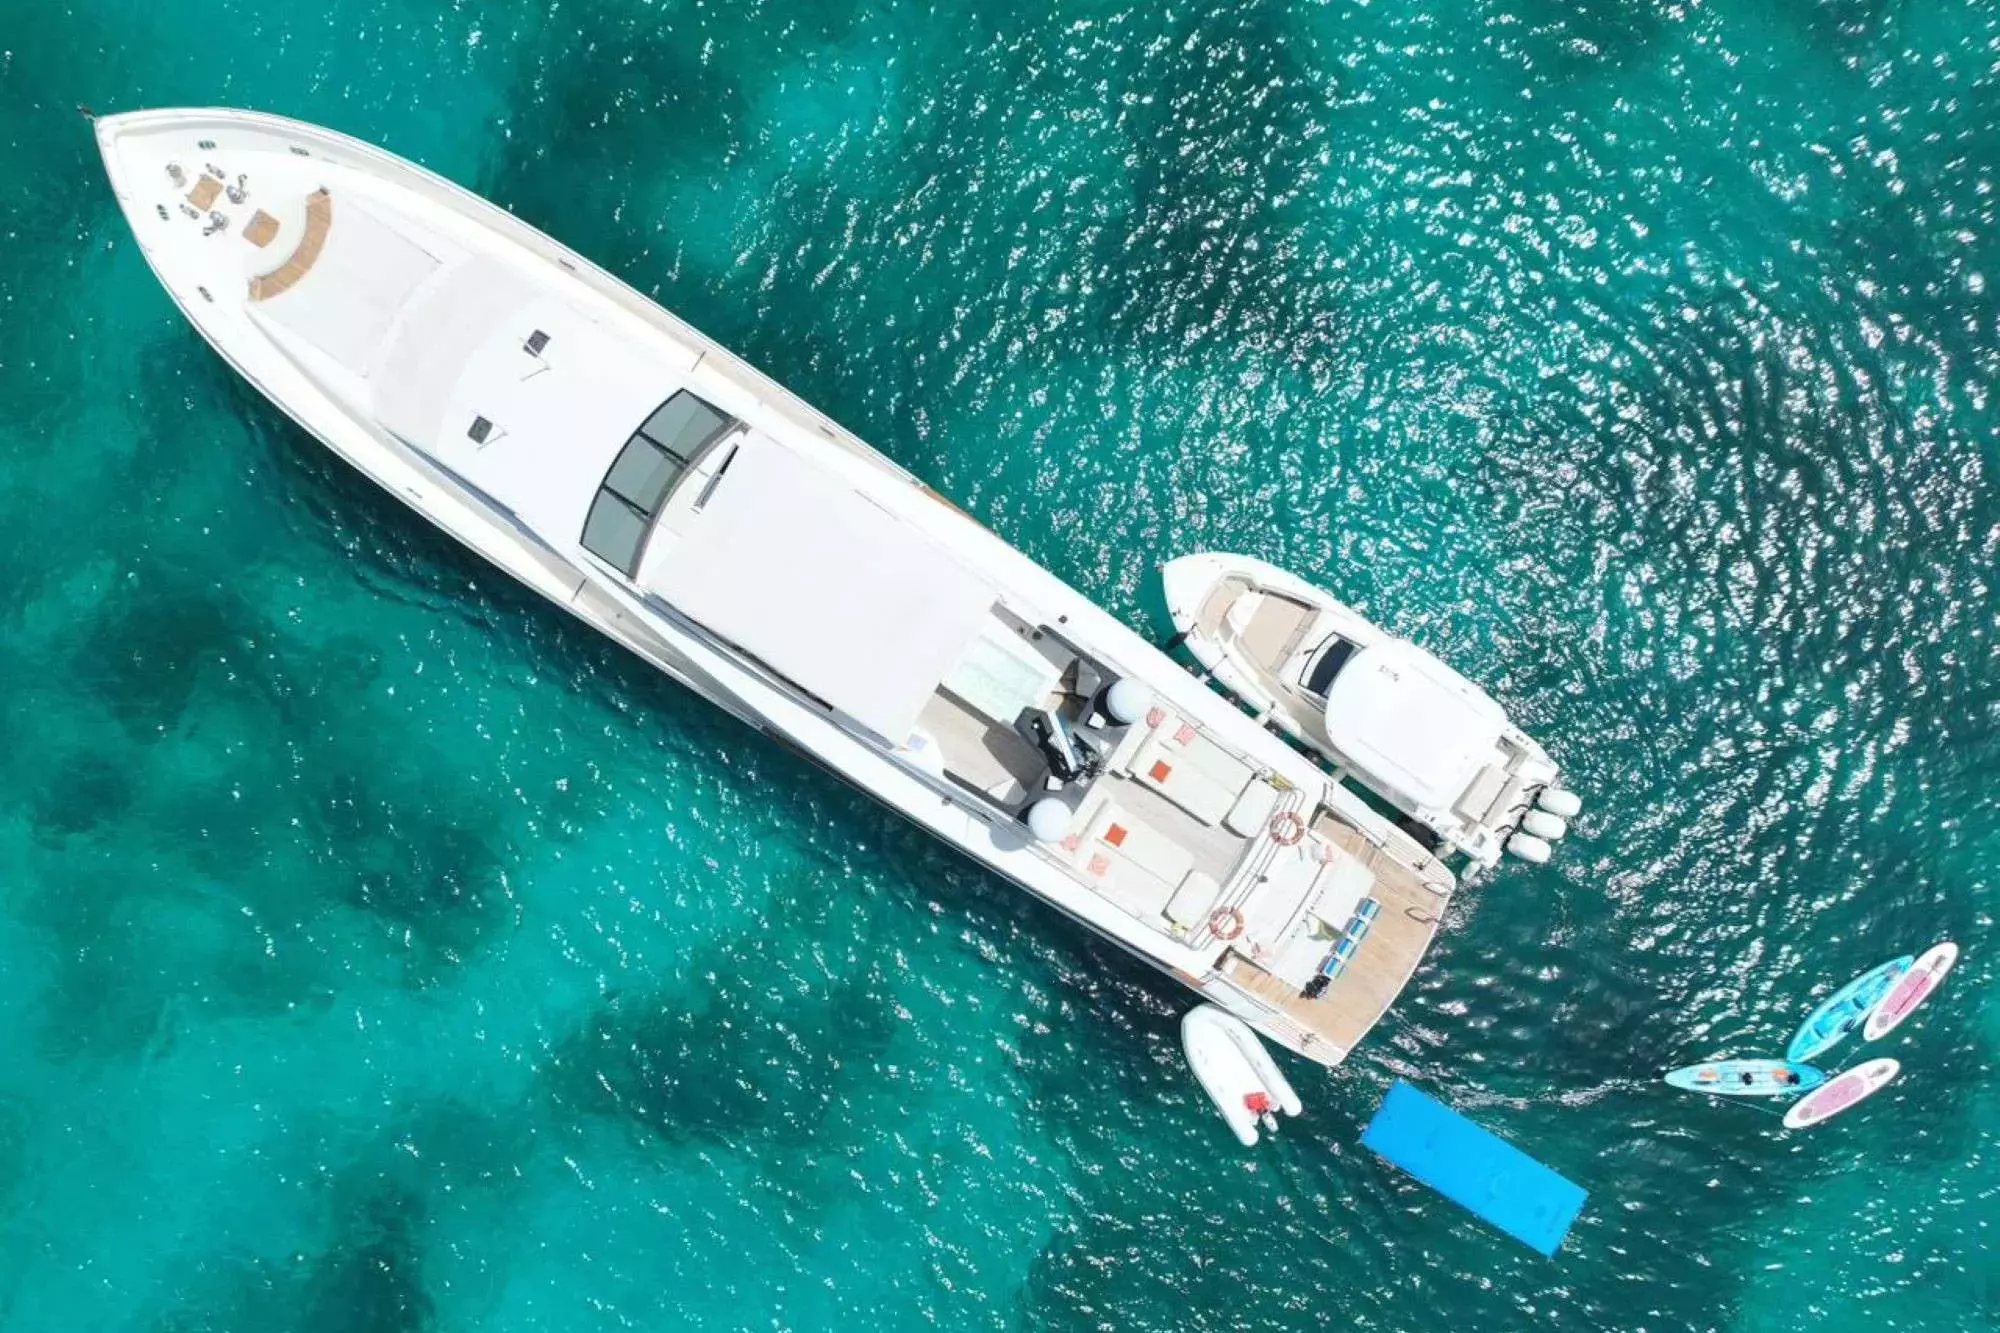 Eclipse by Couach - Top rates for a Charter of a private Superyacht in St Barths